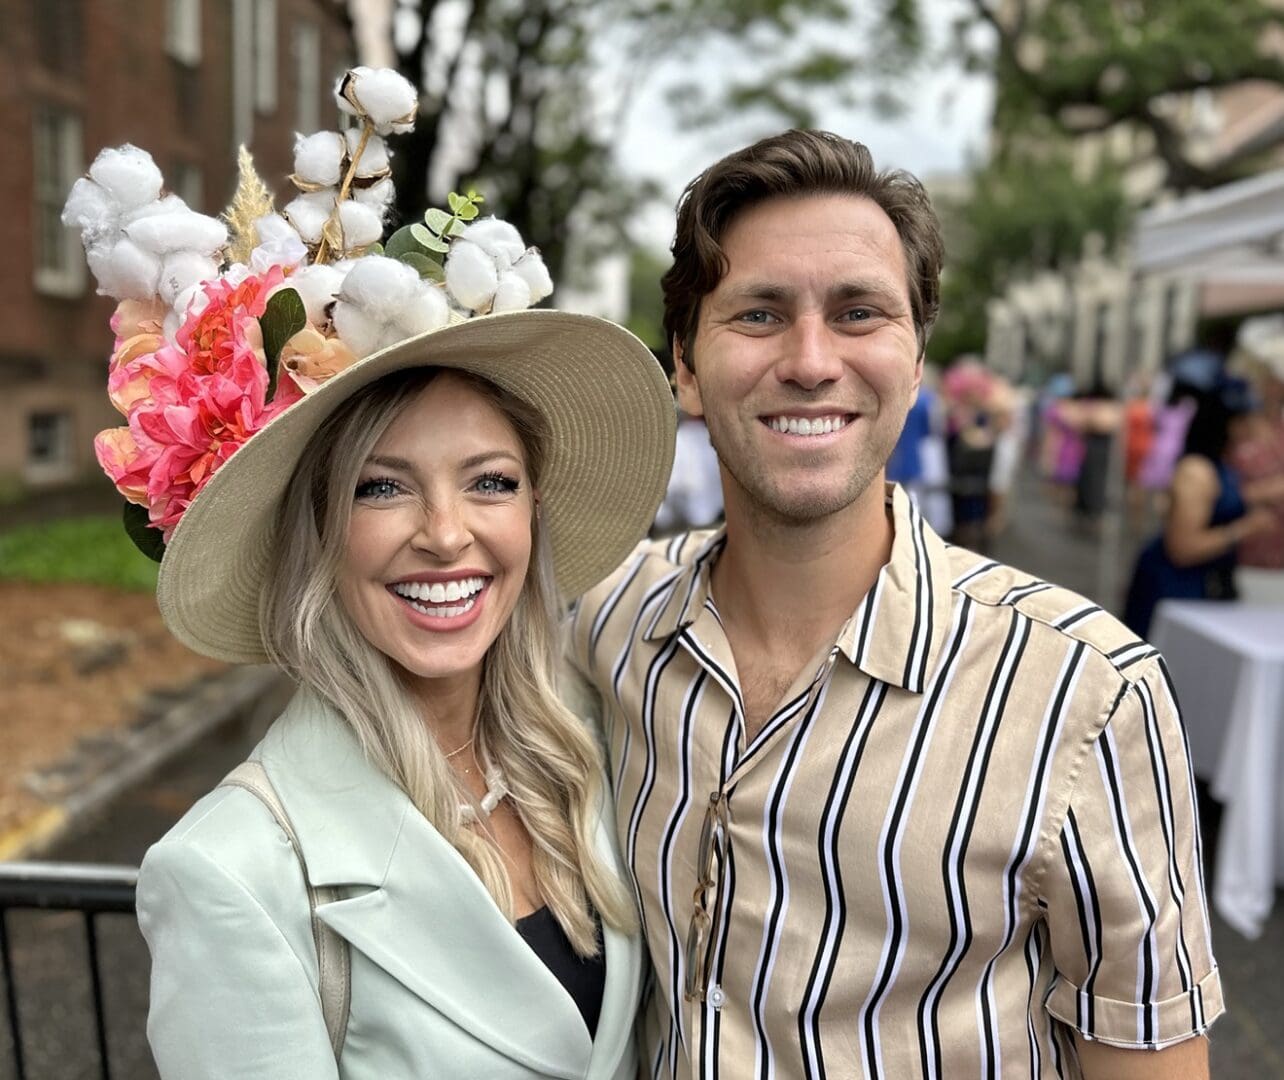 A woman in a decorated hat and a man in a striped shirt smiling together at an outdoor event.